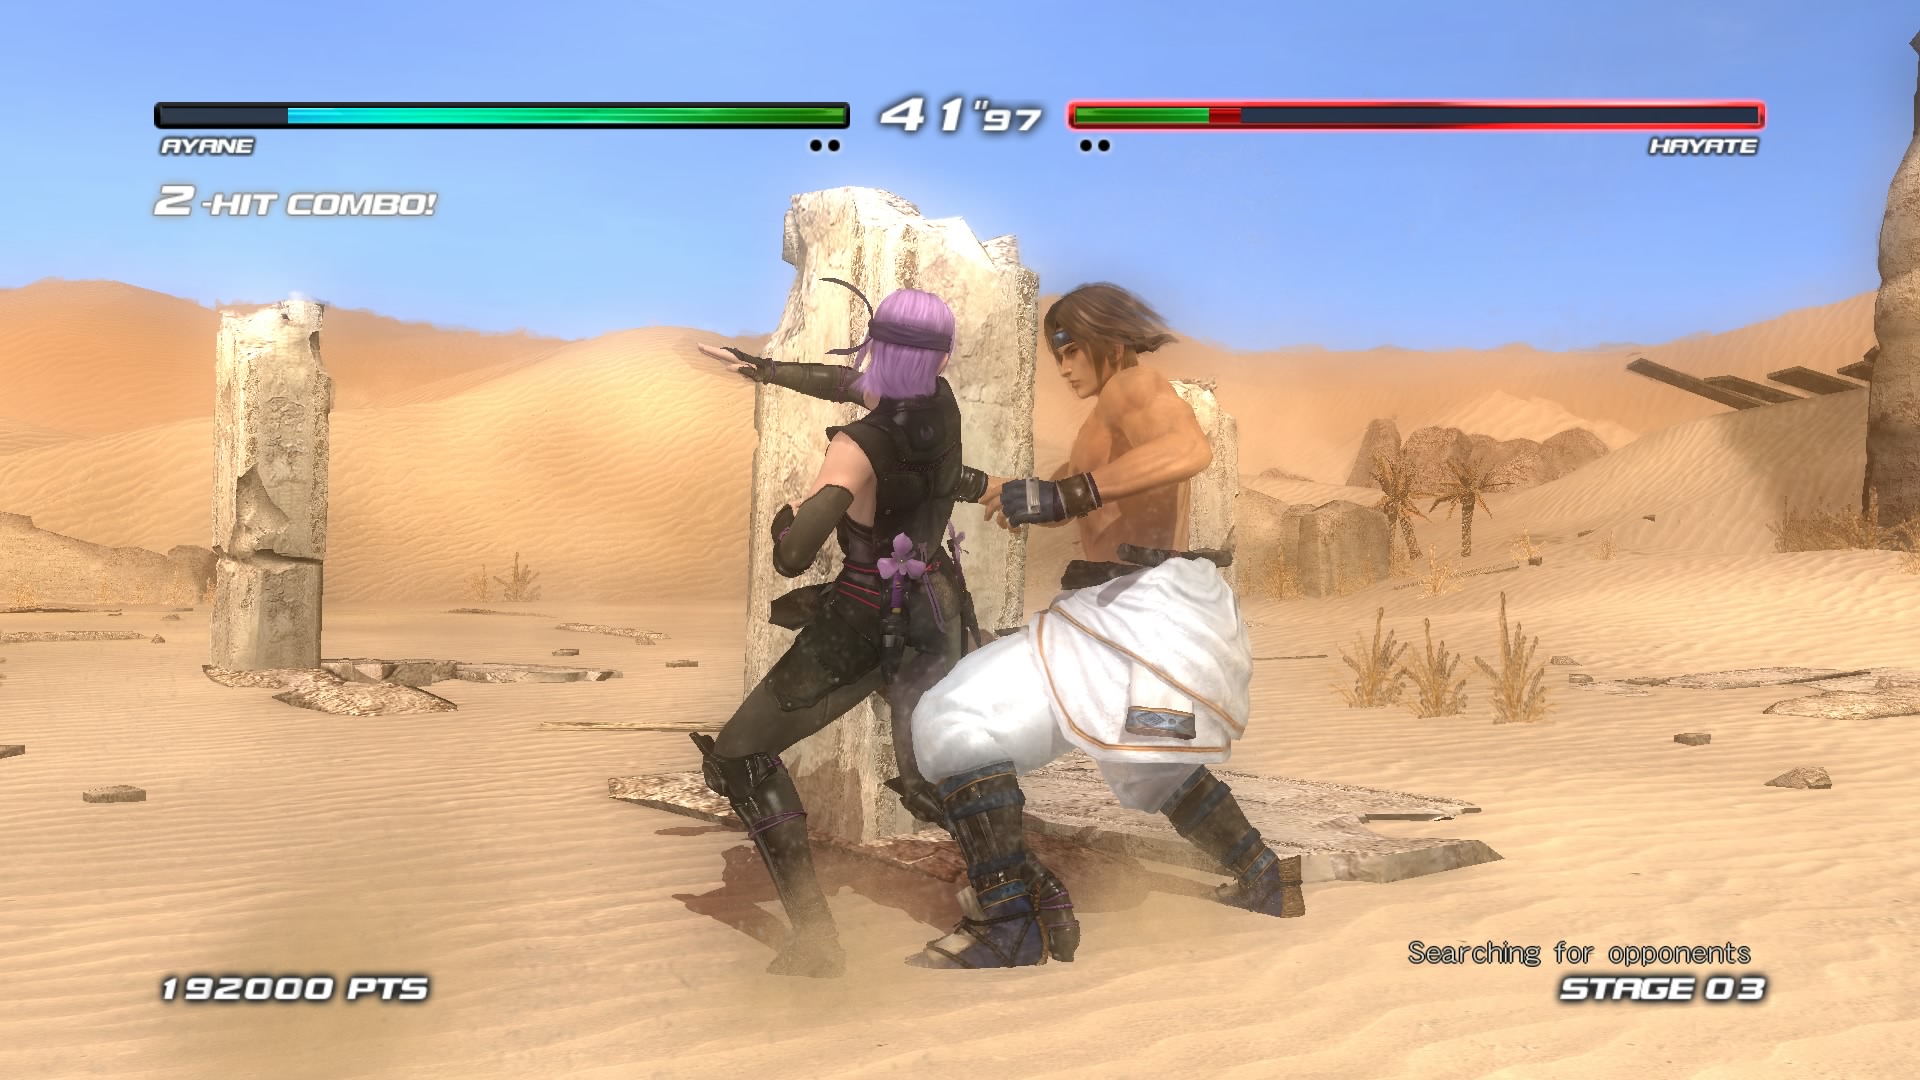 download dead or alive 5 last round ps4